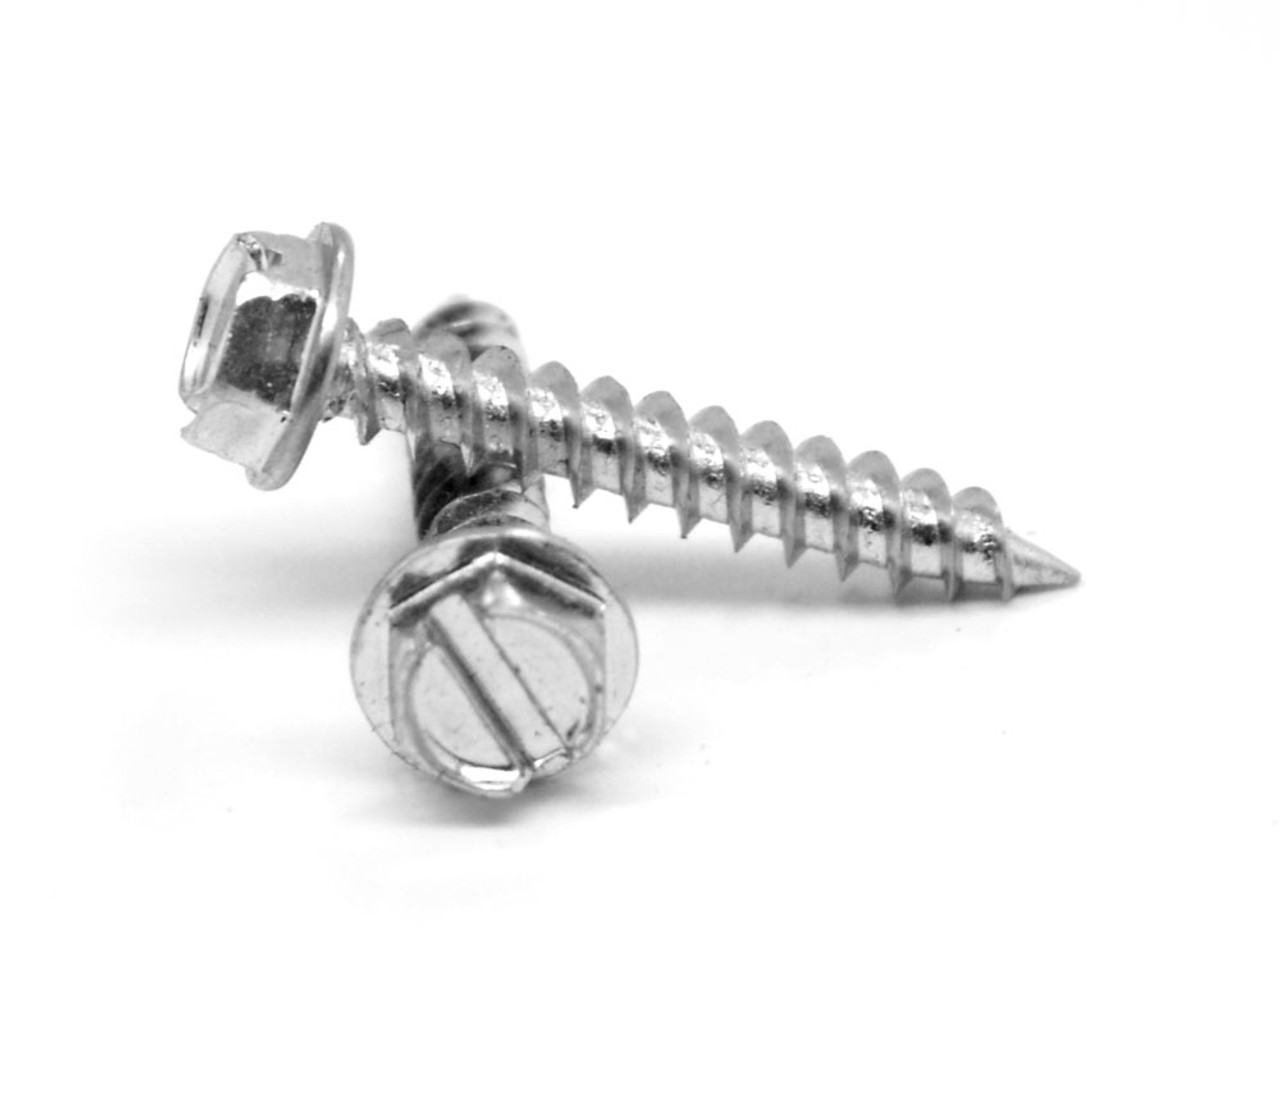 #8-15 x 3/4" (FT) Self-Piercing Twinfast Sheet Metal Screw Slotted Hex Washer Head Low Carbon Steel Zinc Plated